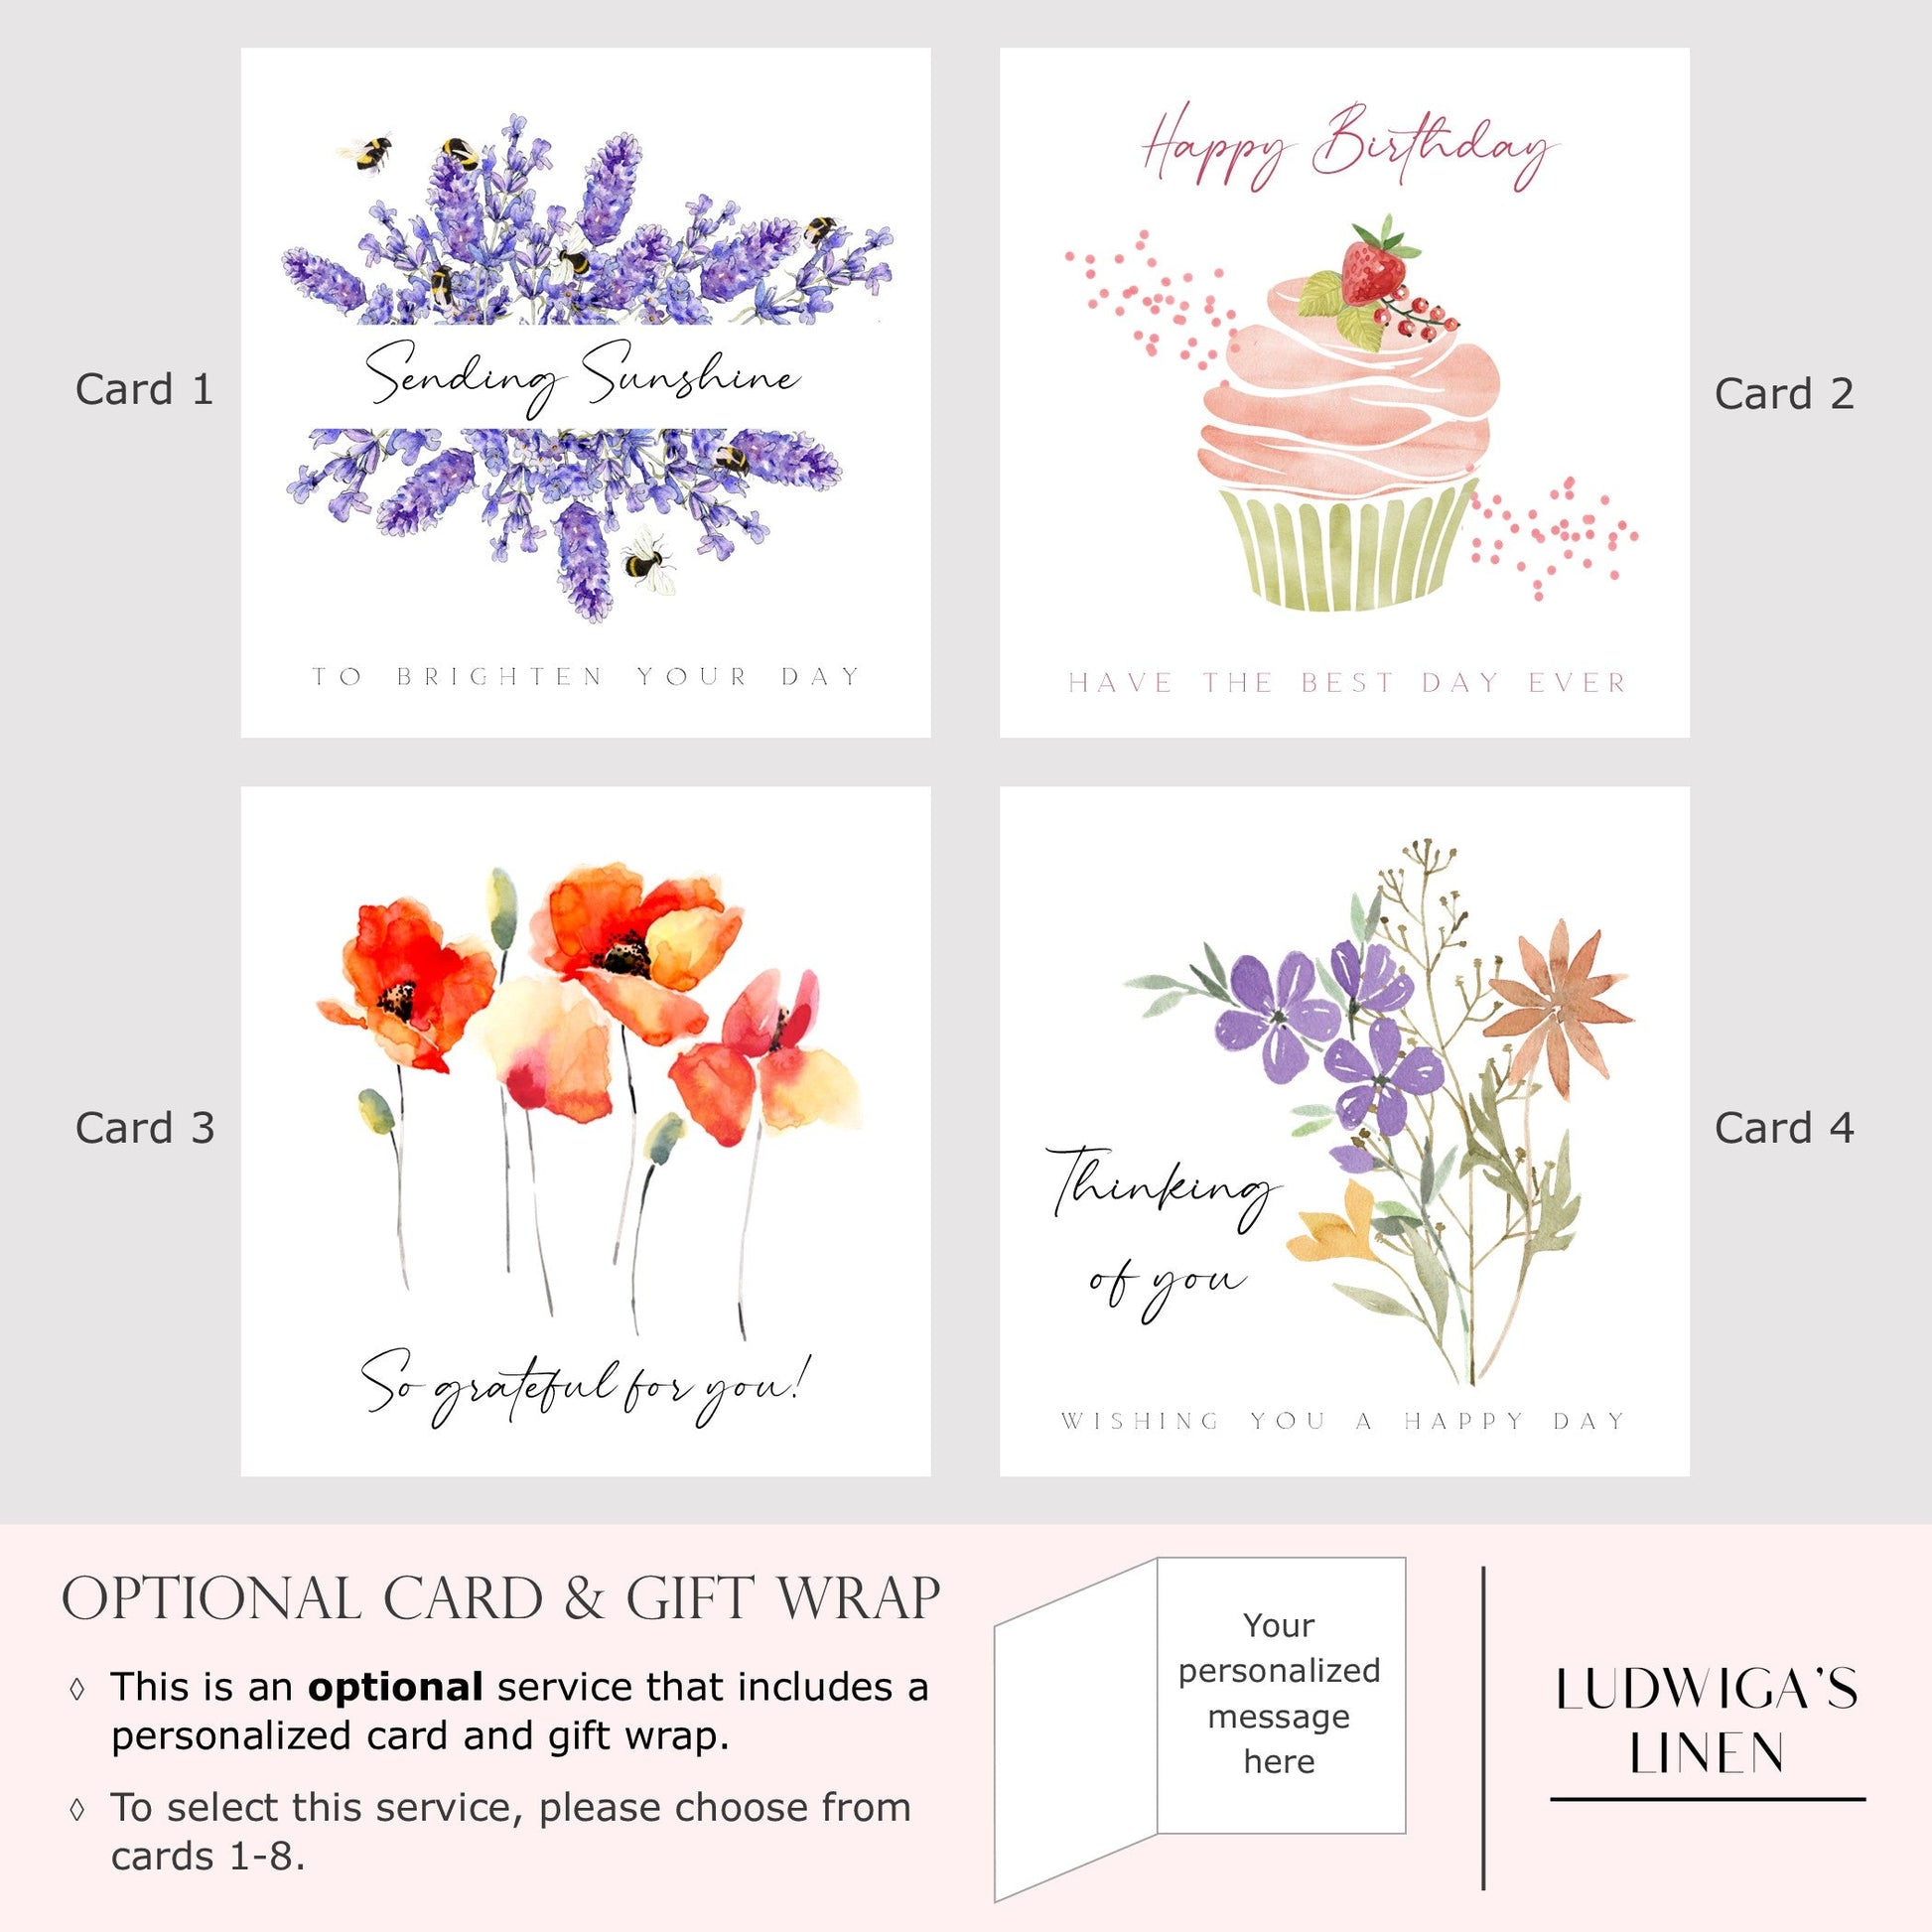 Optional gift box and selection of eight greeting cards, each of which may be personalized